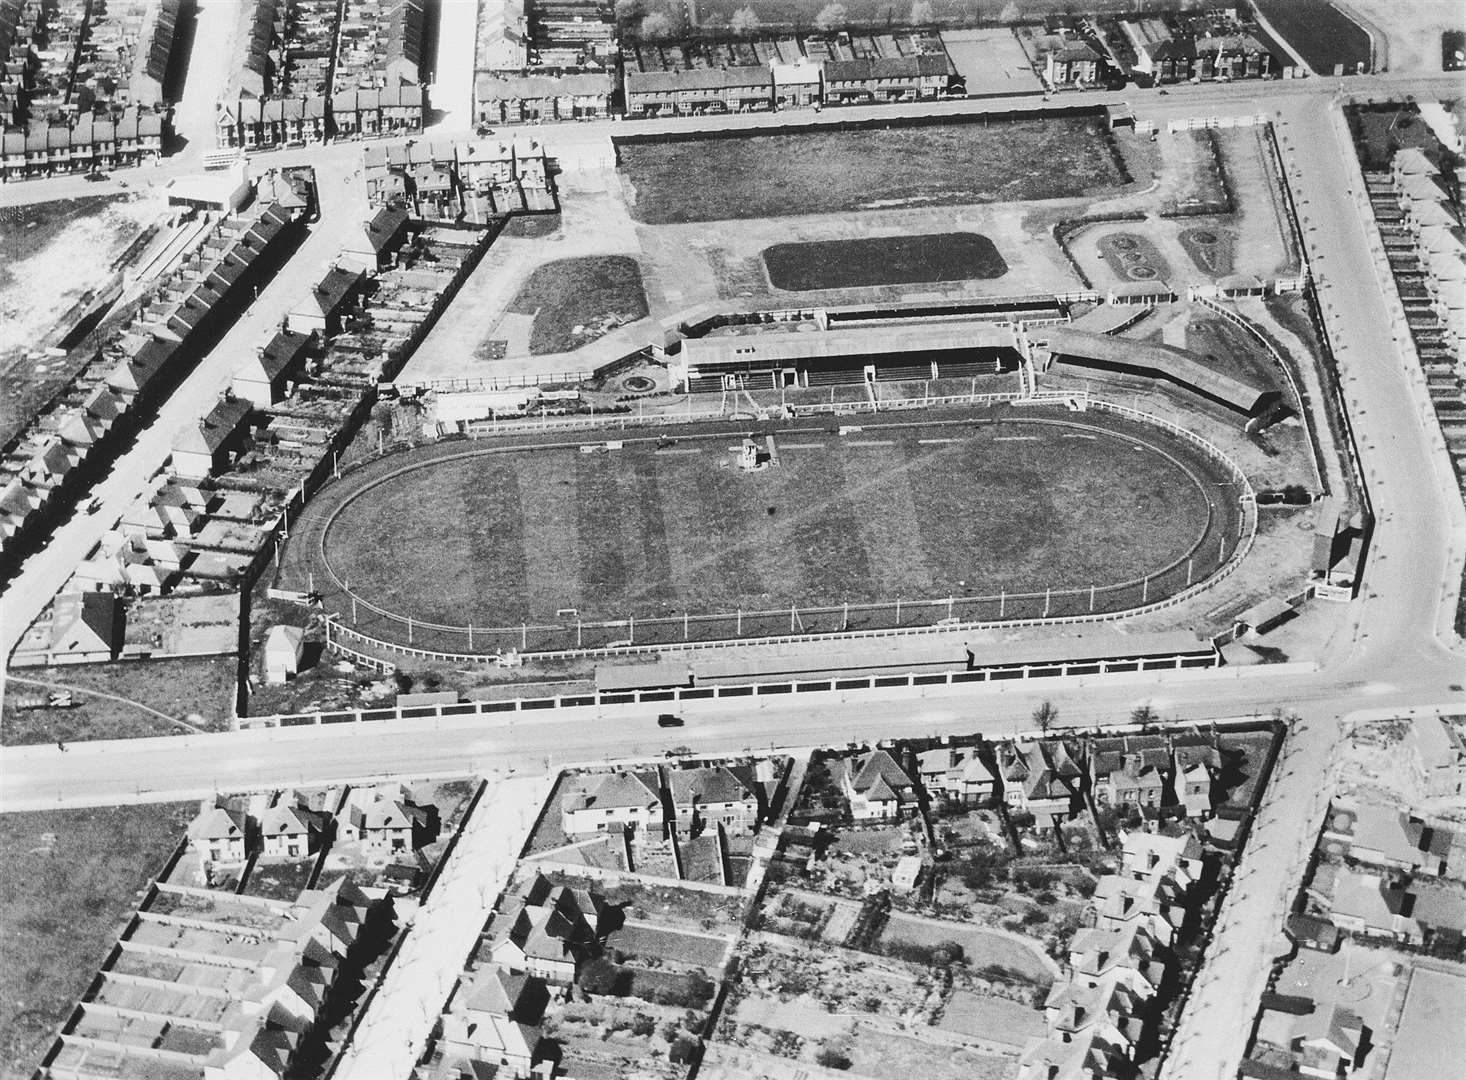 The old greyhound track at Dumpton, near Ramsgate - today it's housing